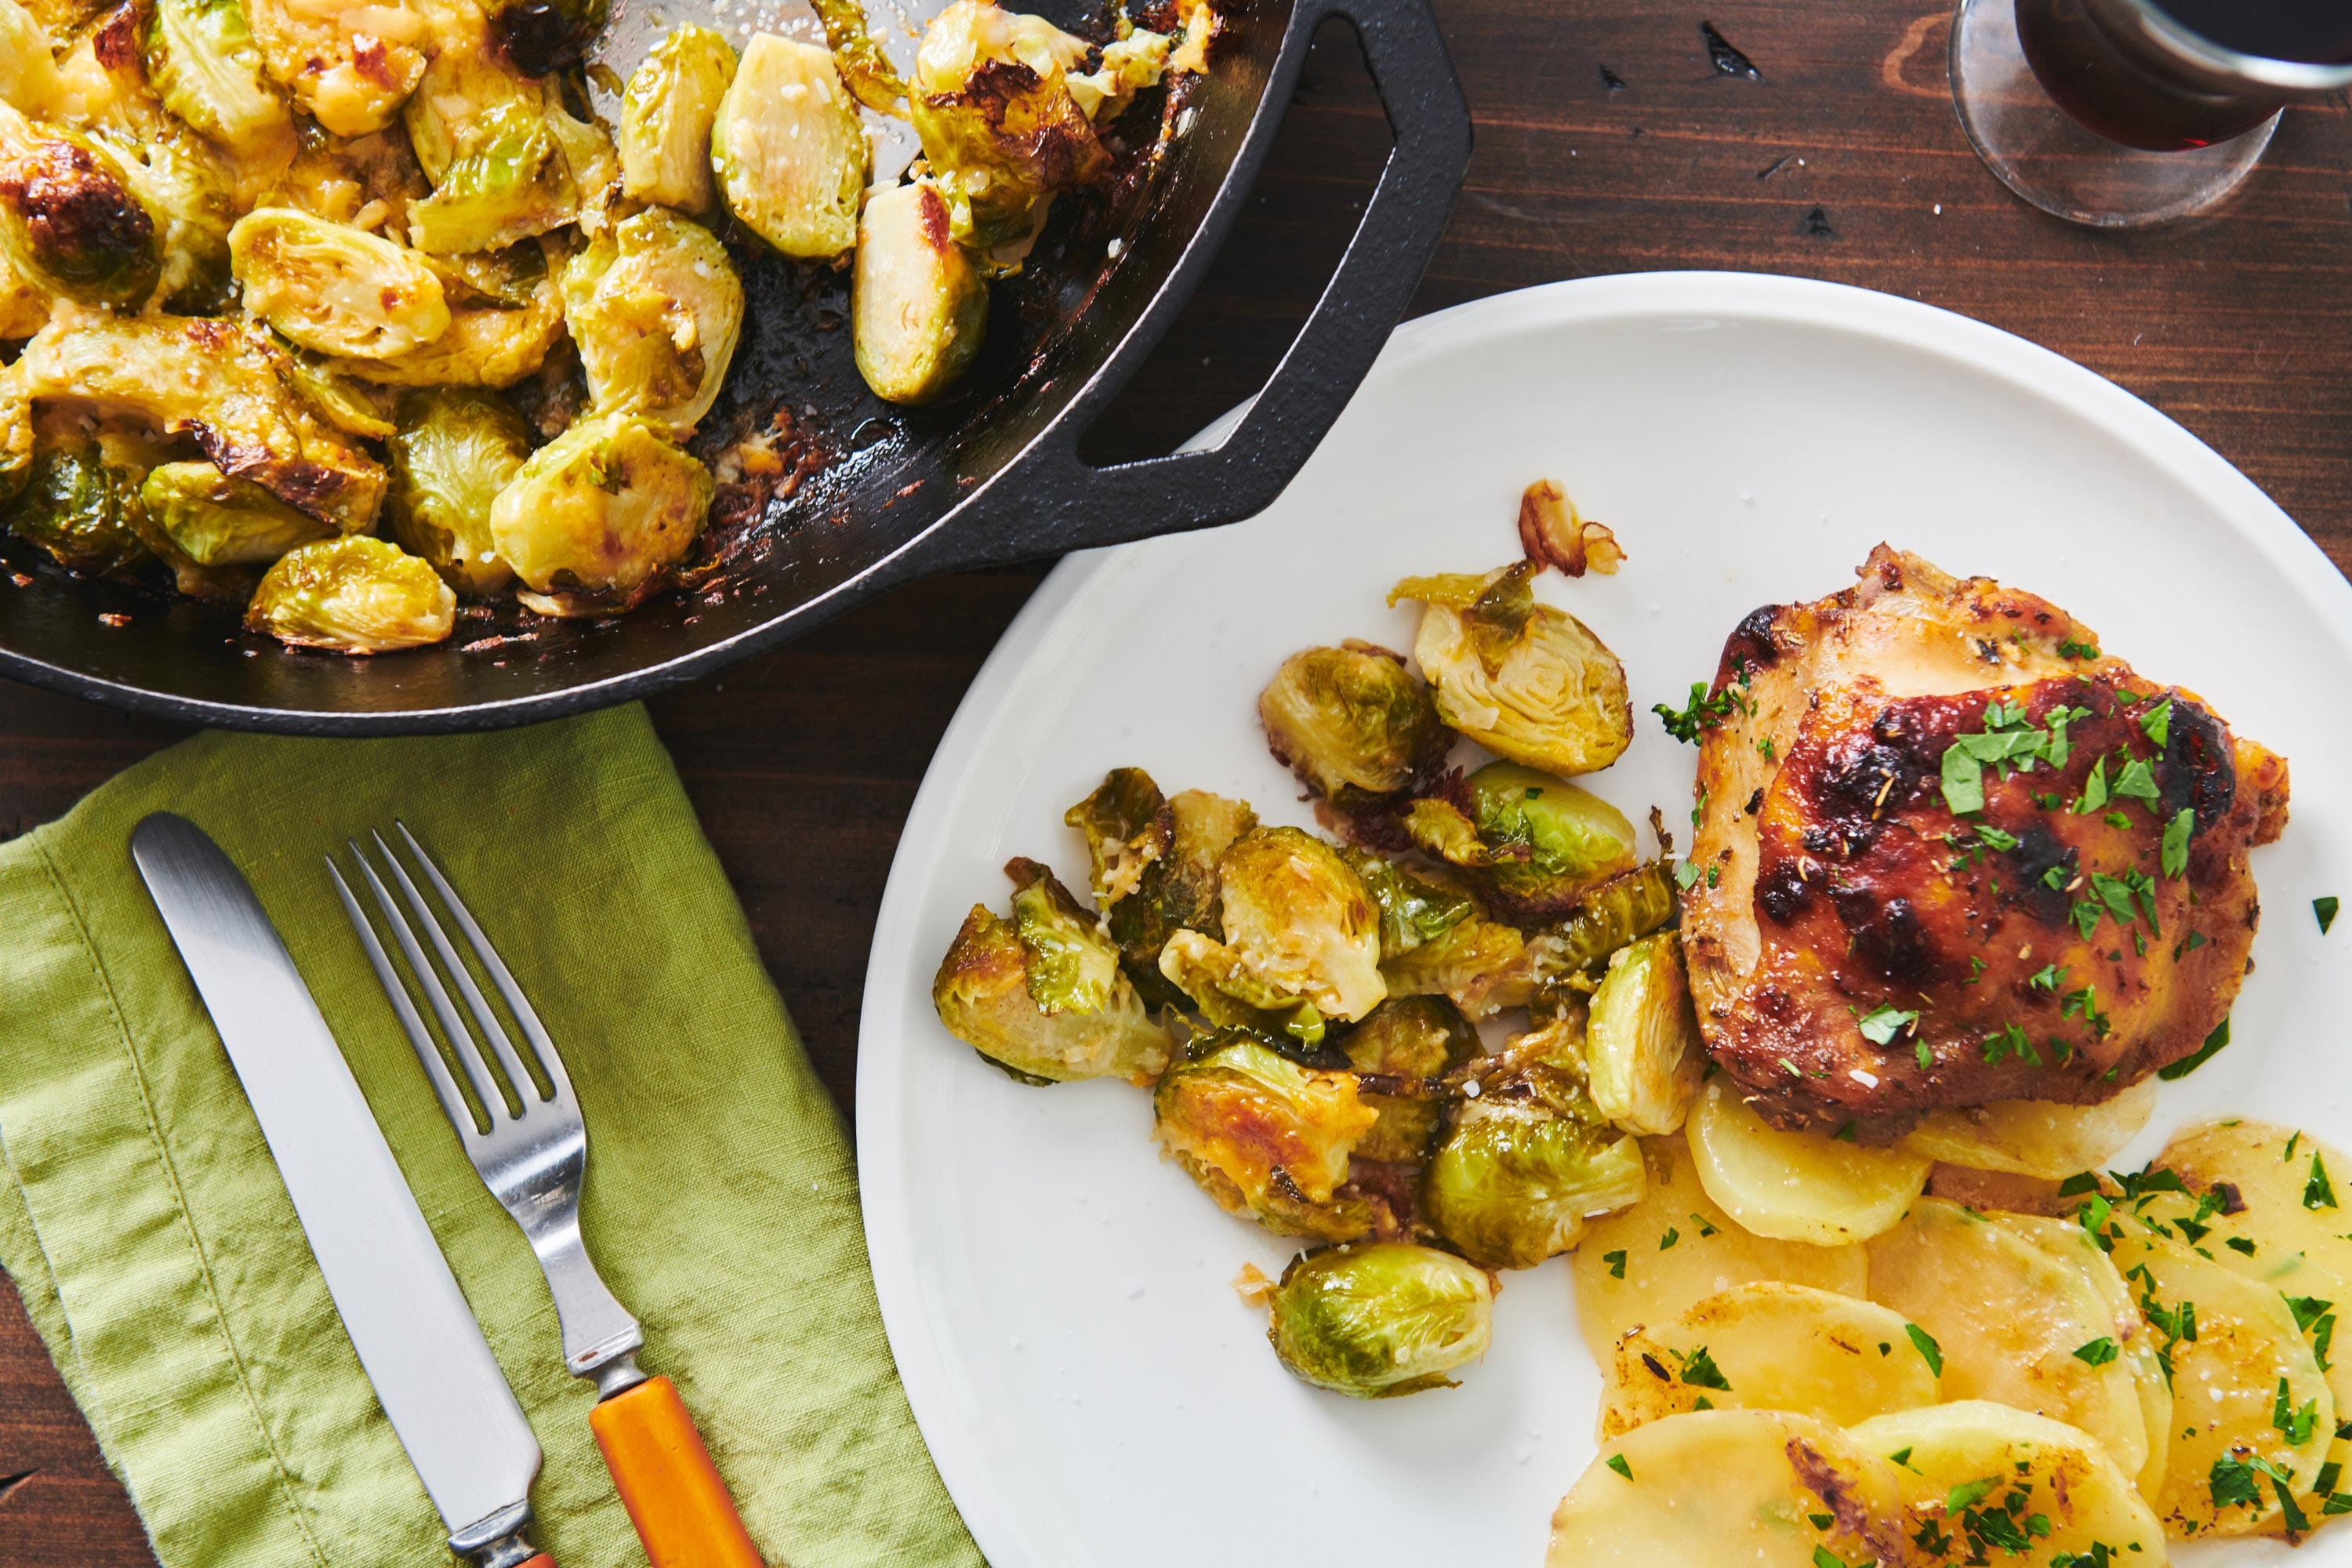 Plate of potatoes,chicken thighs, and Cheesy Baked Brussels Sprouts.